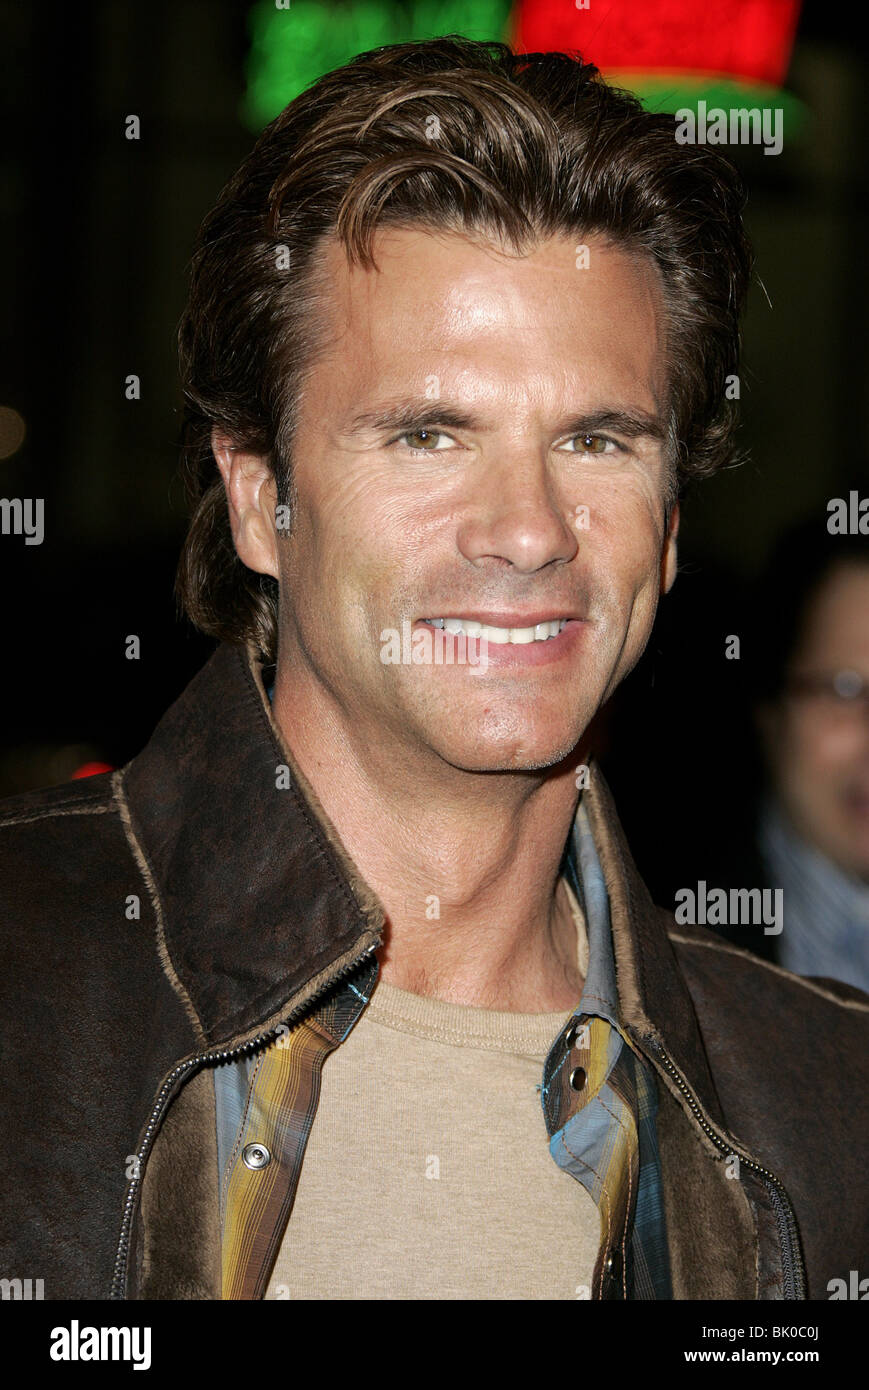 LORENZO LAMAS FIREWALL PREMIÈRE MONDIALE CHINESE THEATRE HOLLYWOOD LOS ANGELES USA 02 Février 2006 Banque D'Images